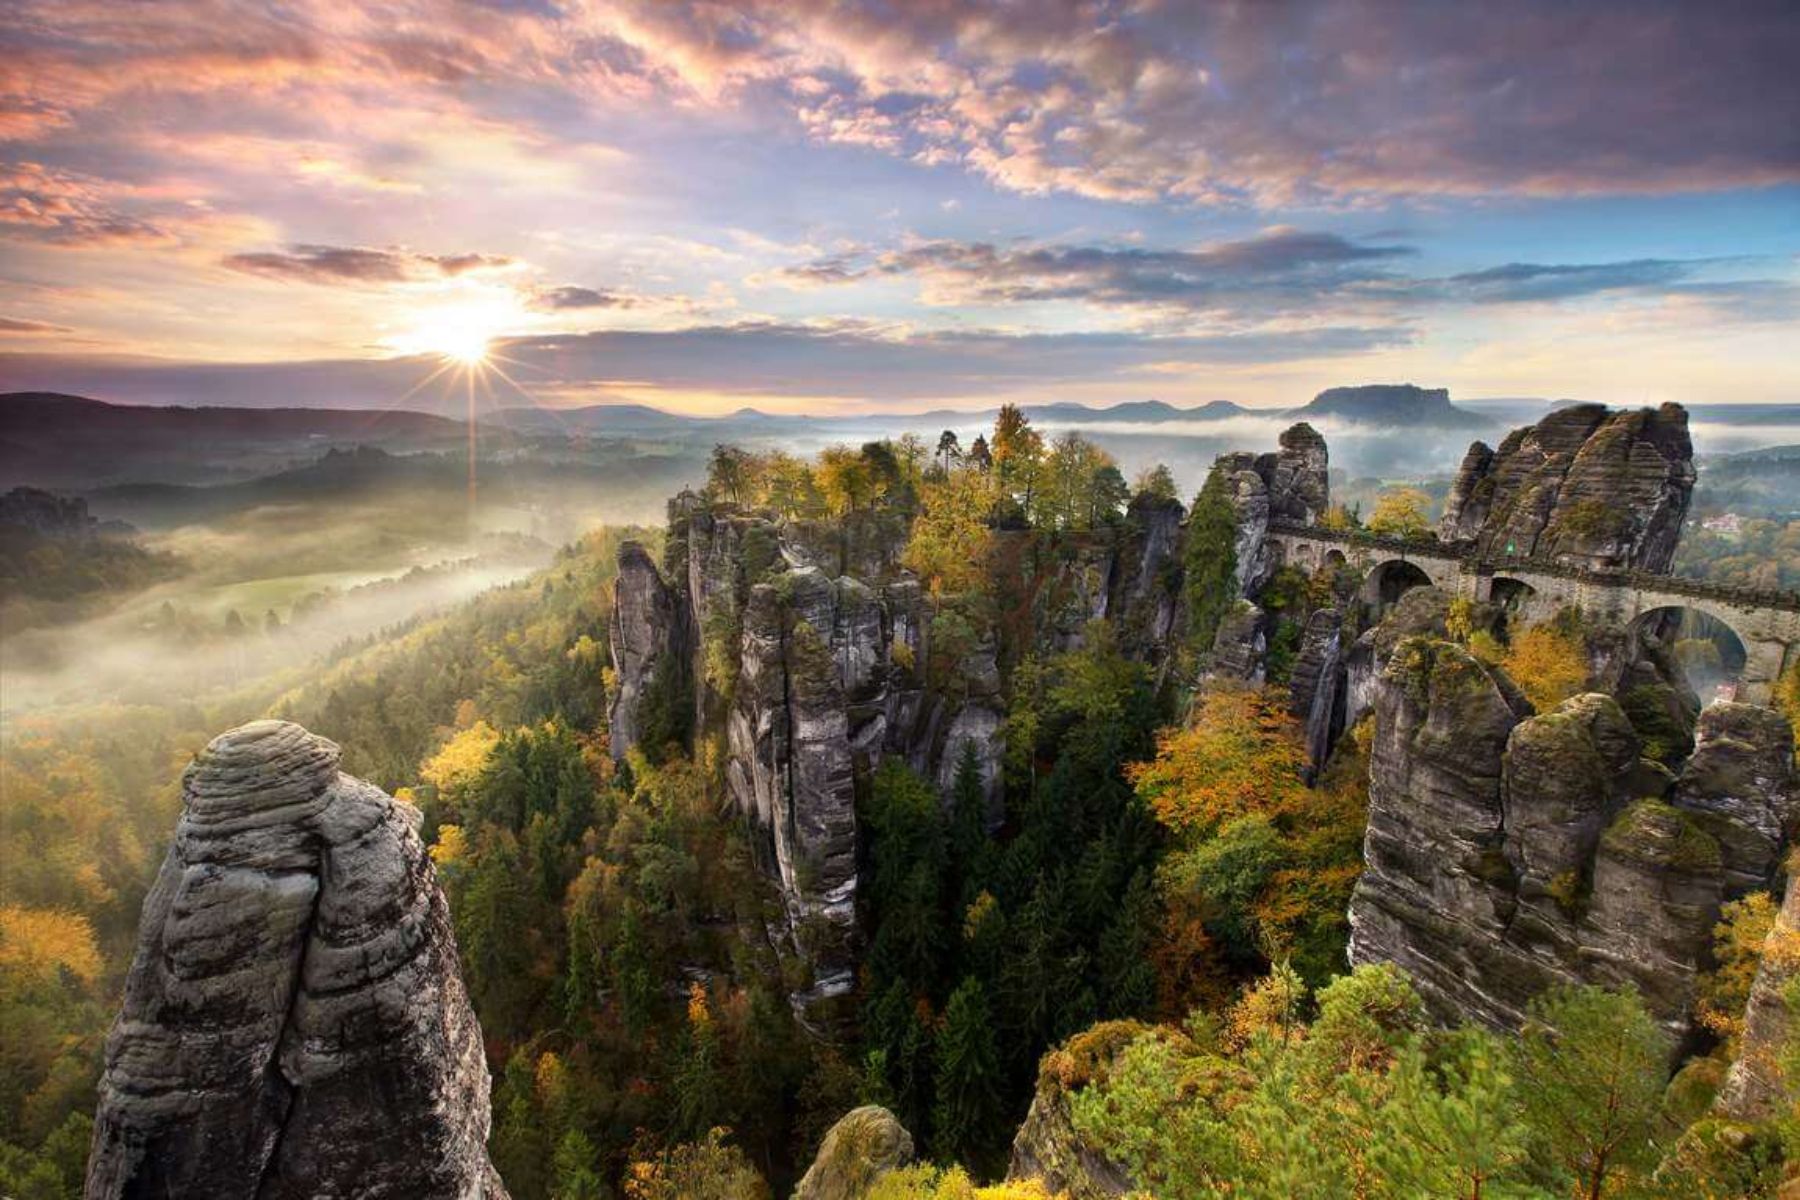 Hike in the Saxon Switzerland National Park